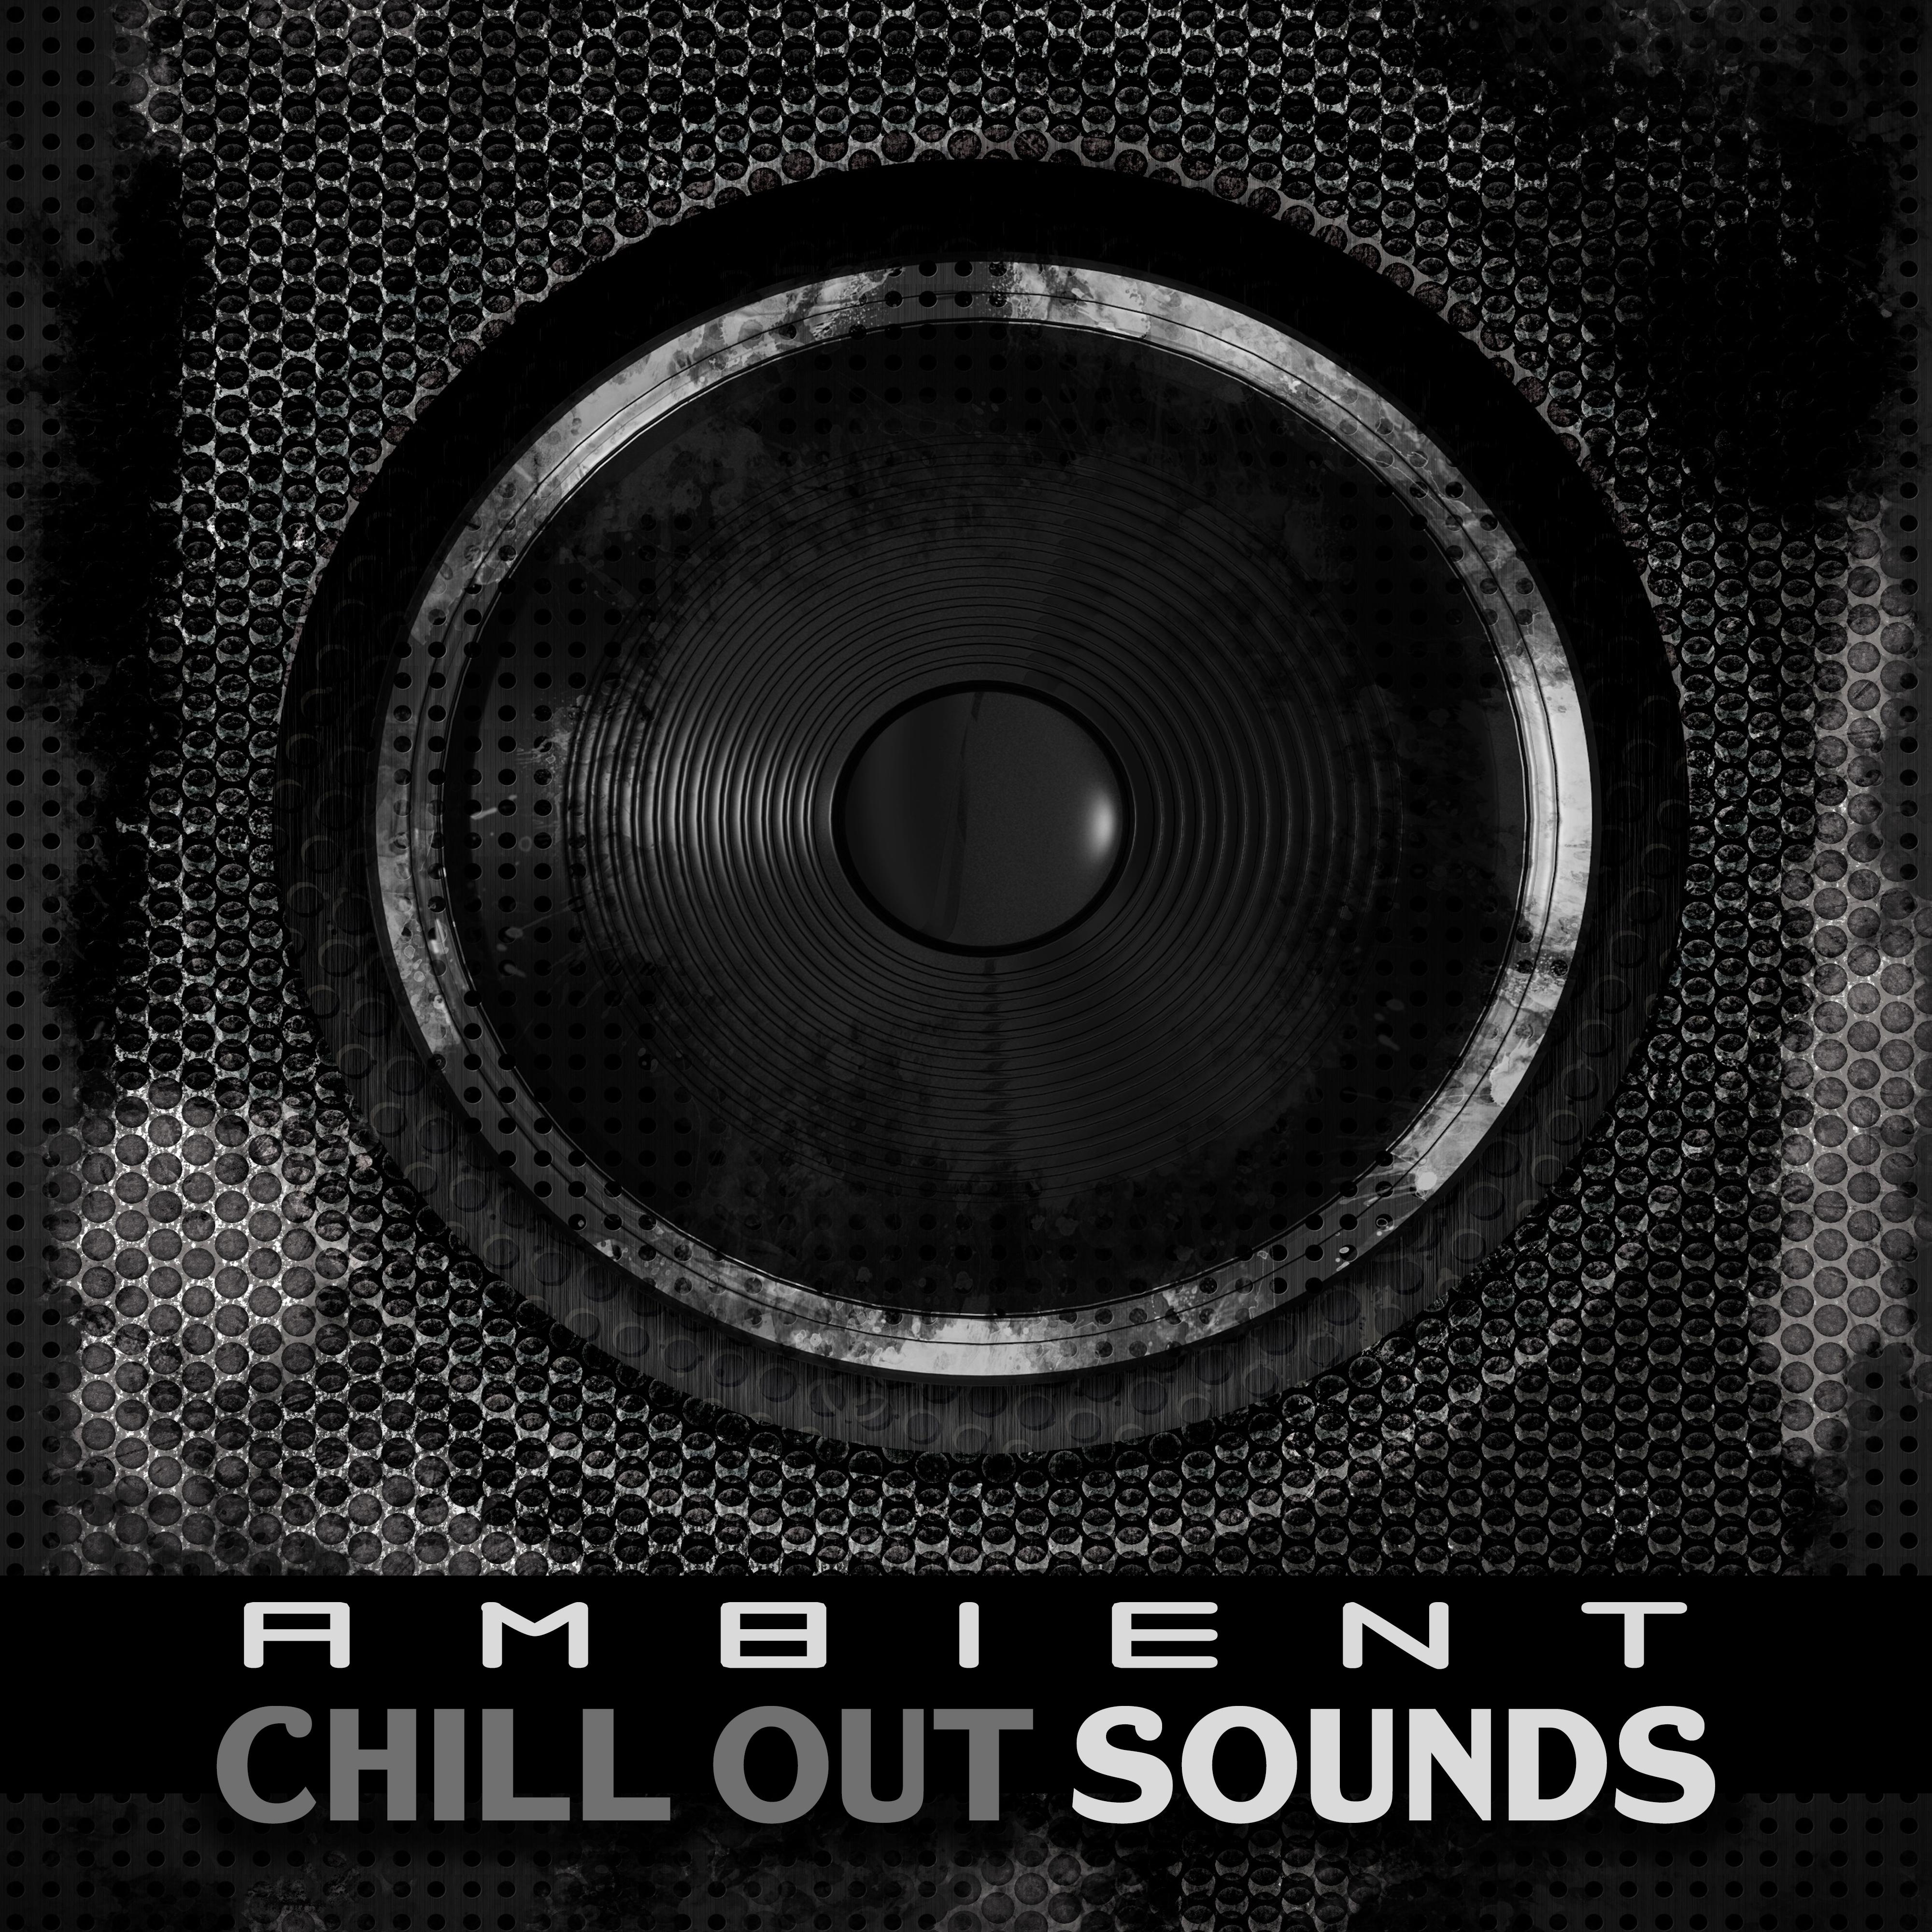 Ambient Chill Out Sounds – Chilled Sounds to Relax, Summer Calm Vibes, Peaceful Beats